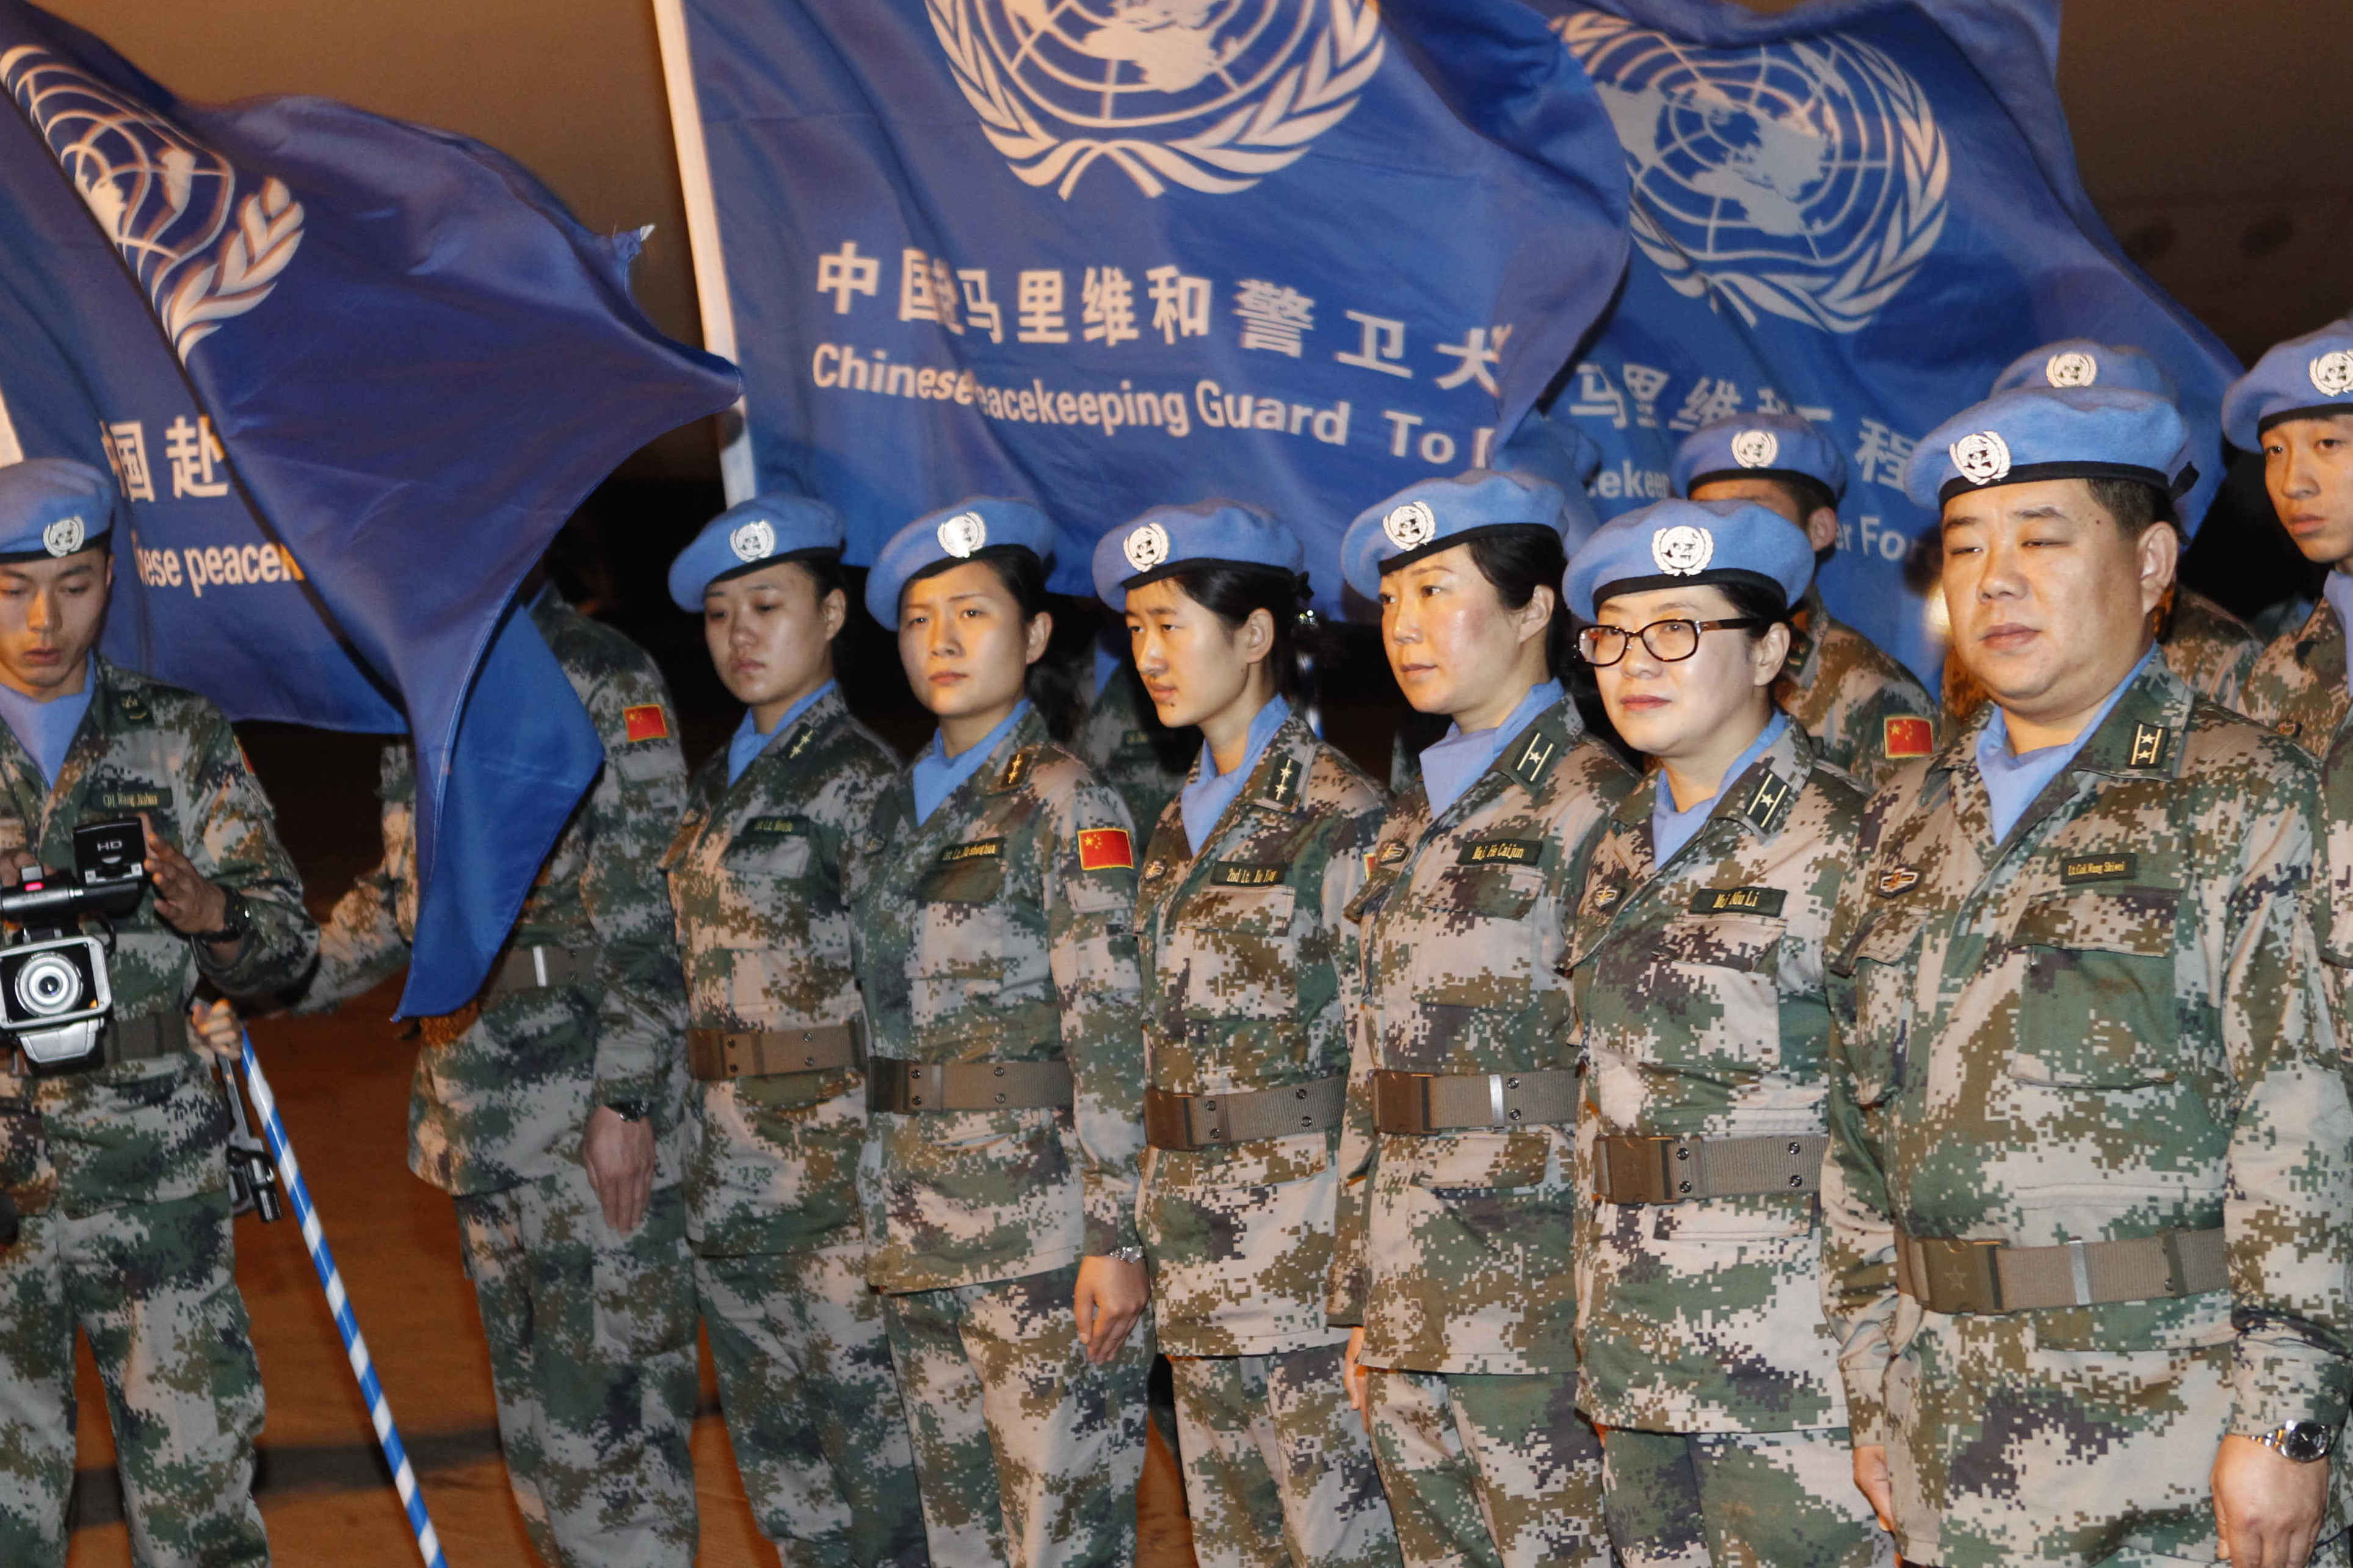 Chinese peacekeepers stand in formation after their arrival in Bamako, Mali, in December 2013, the first time China dispatched security forces for a peacekeeping mission. Photo: Xinhua